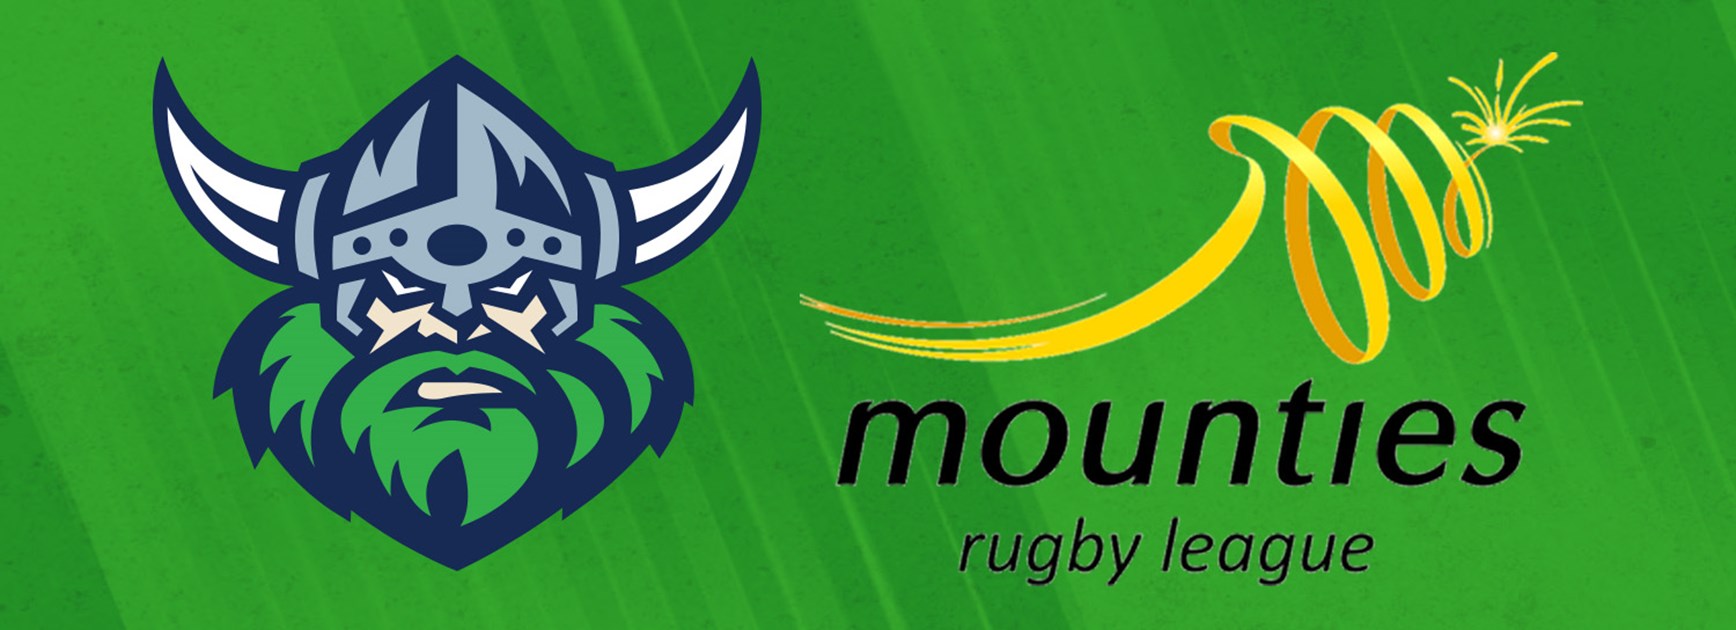 Raiders sign MOU with Mounties for NRLW Pathway program